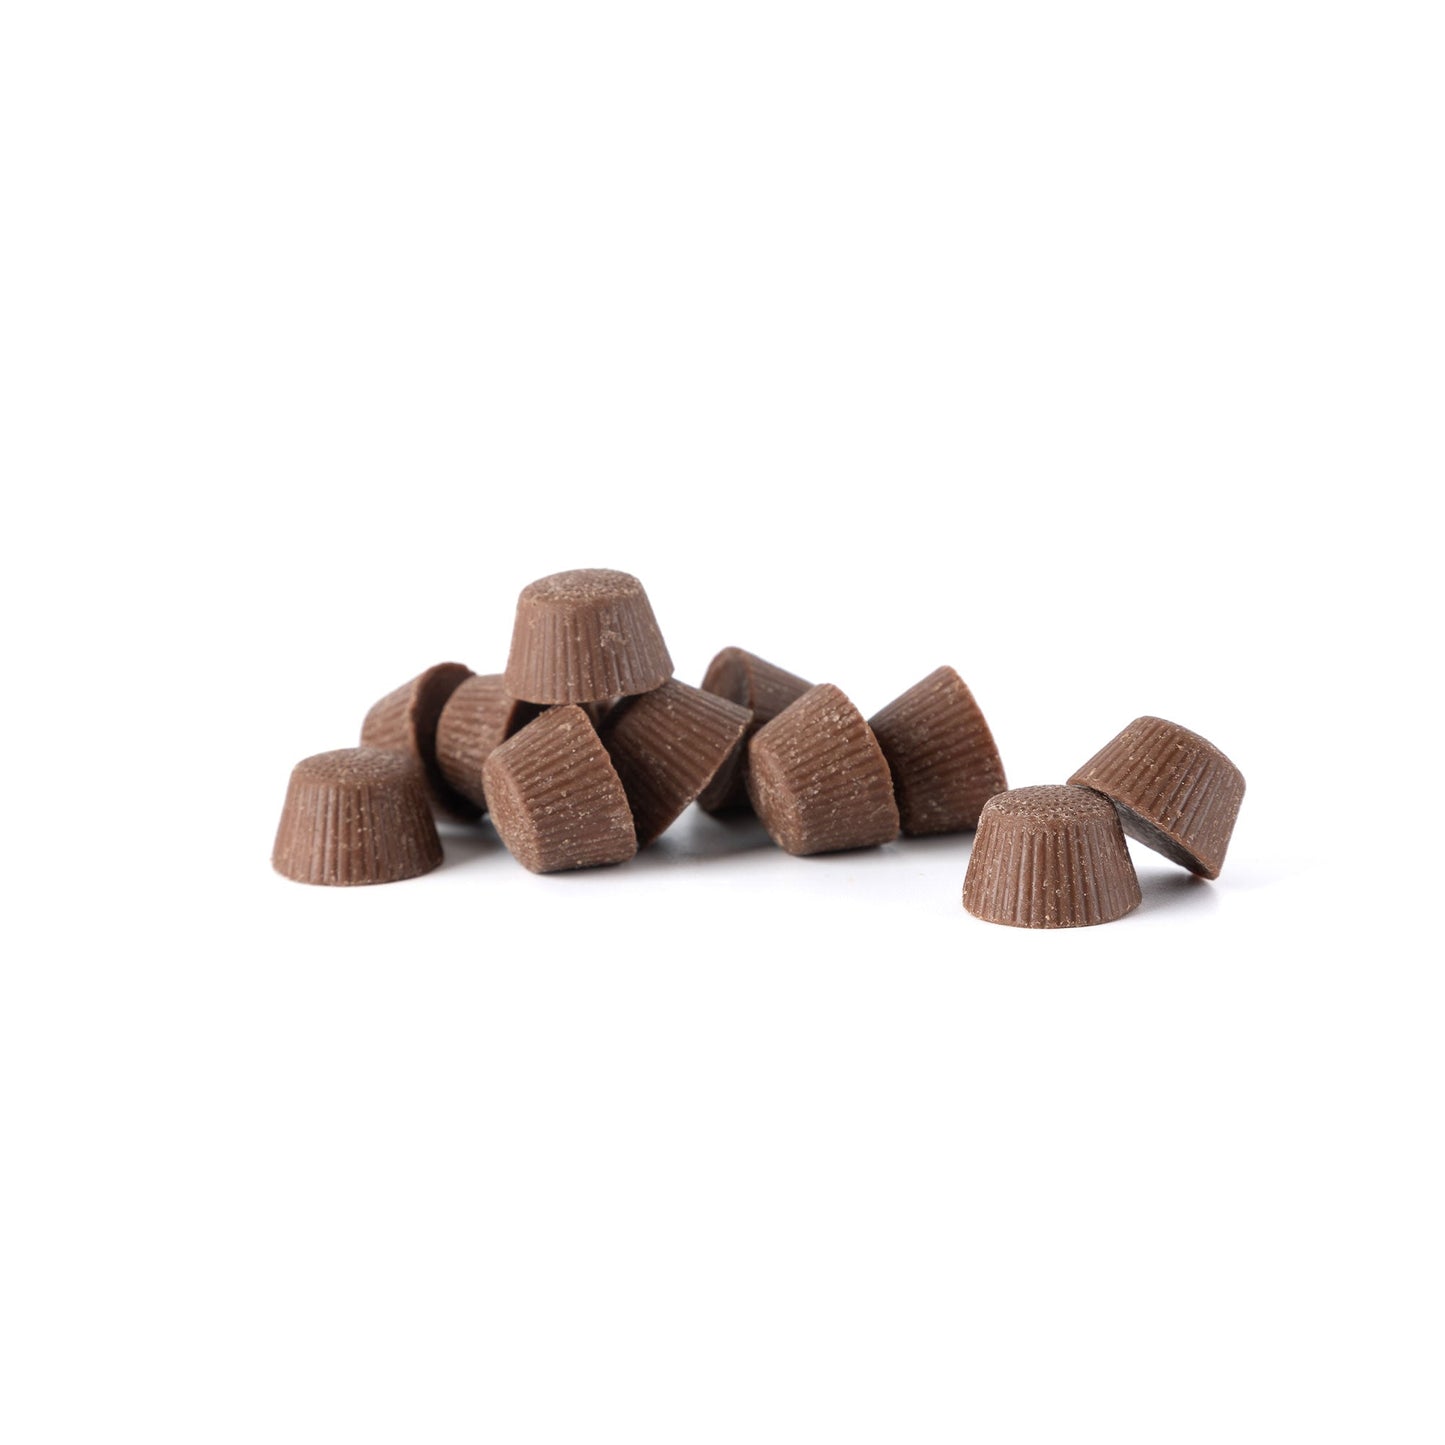 PEANUT BUTTER CUP 400 PLASTIC SMALL